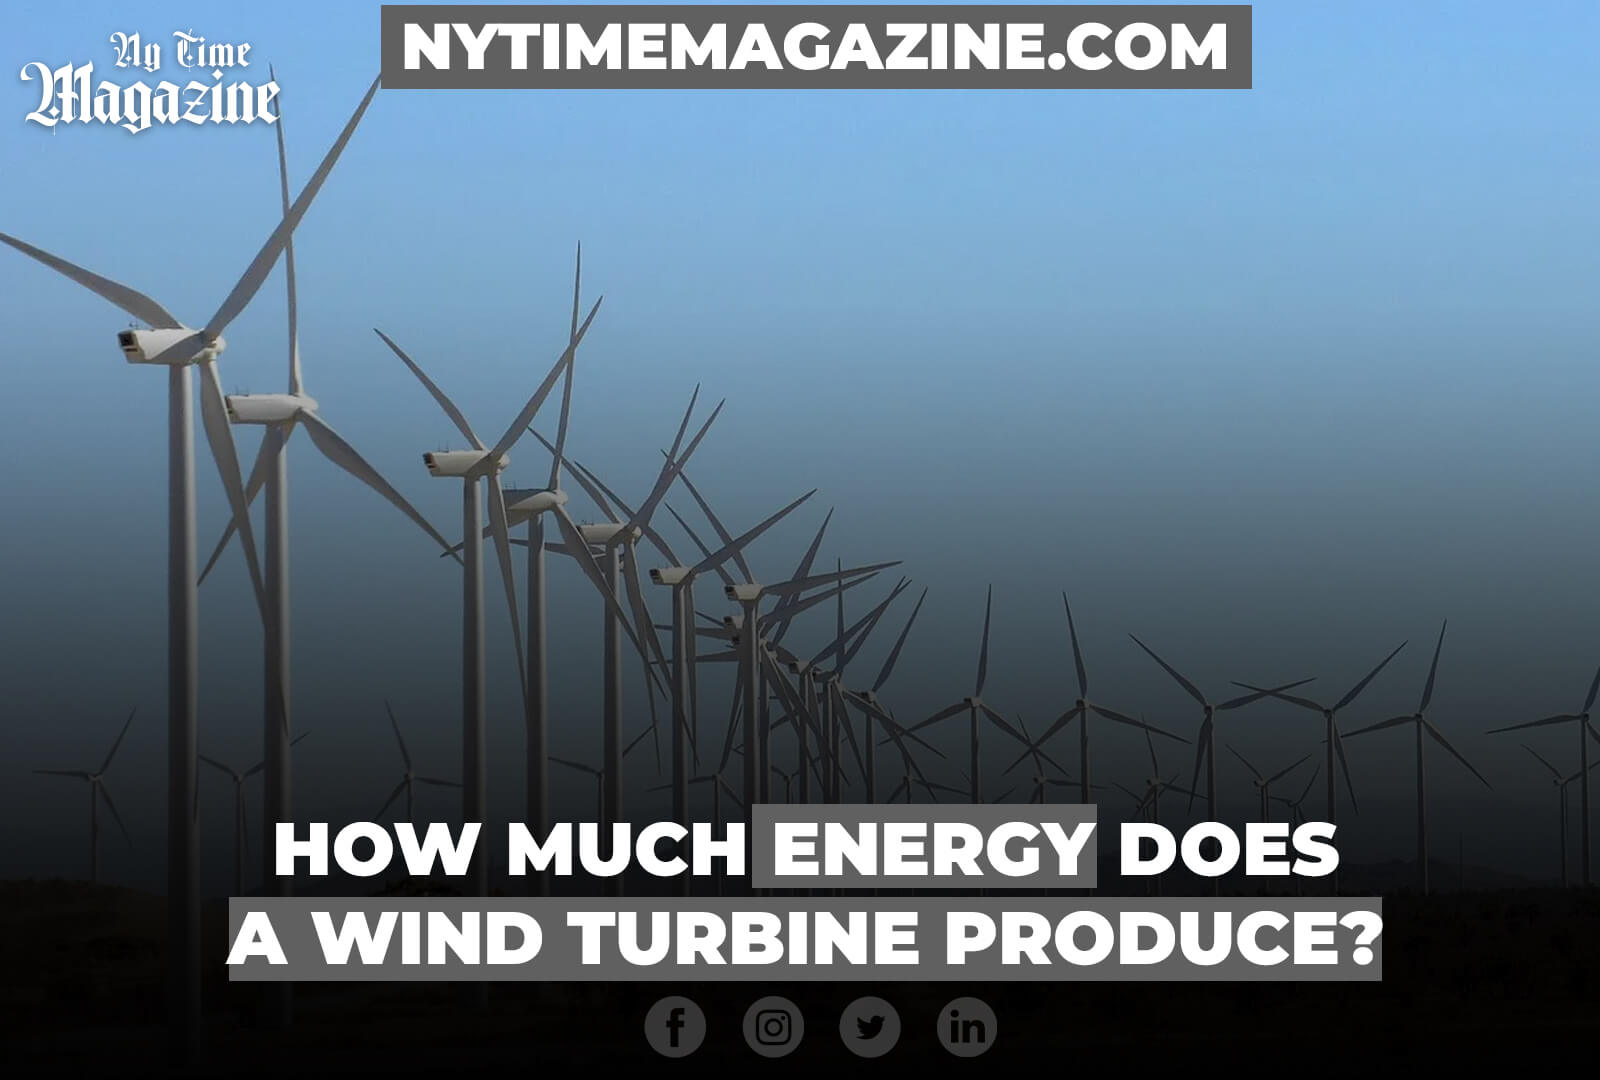 HOW MUCH ENERGY DOES A WIND TURBINE PRODUCE?